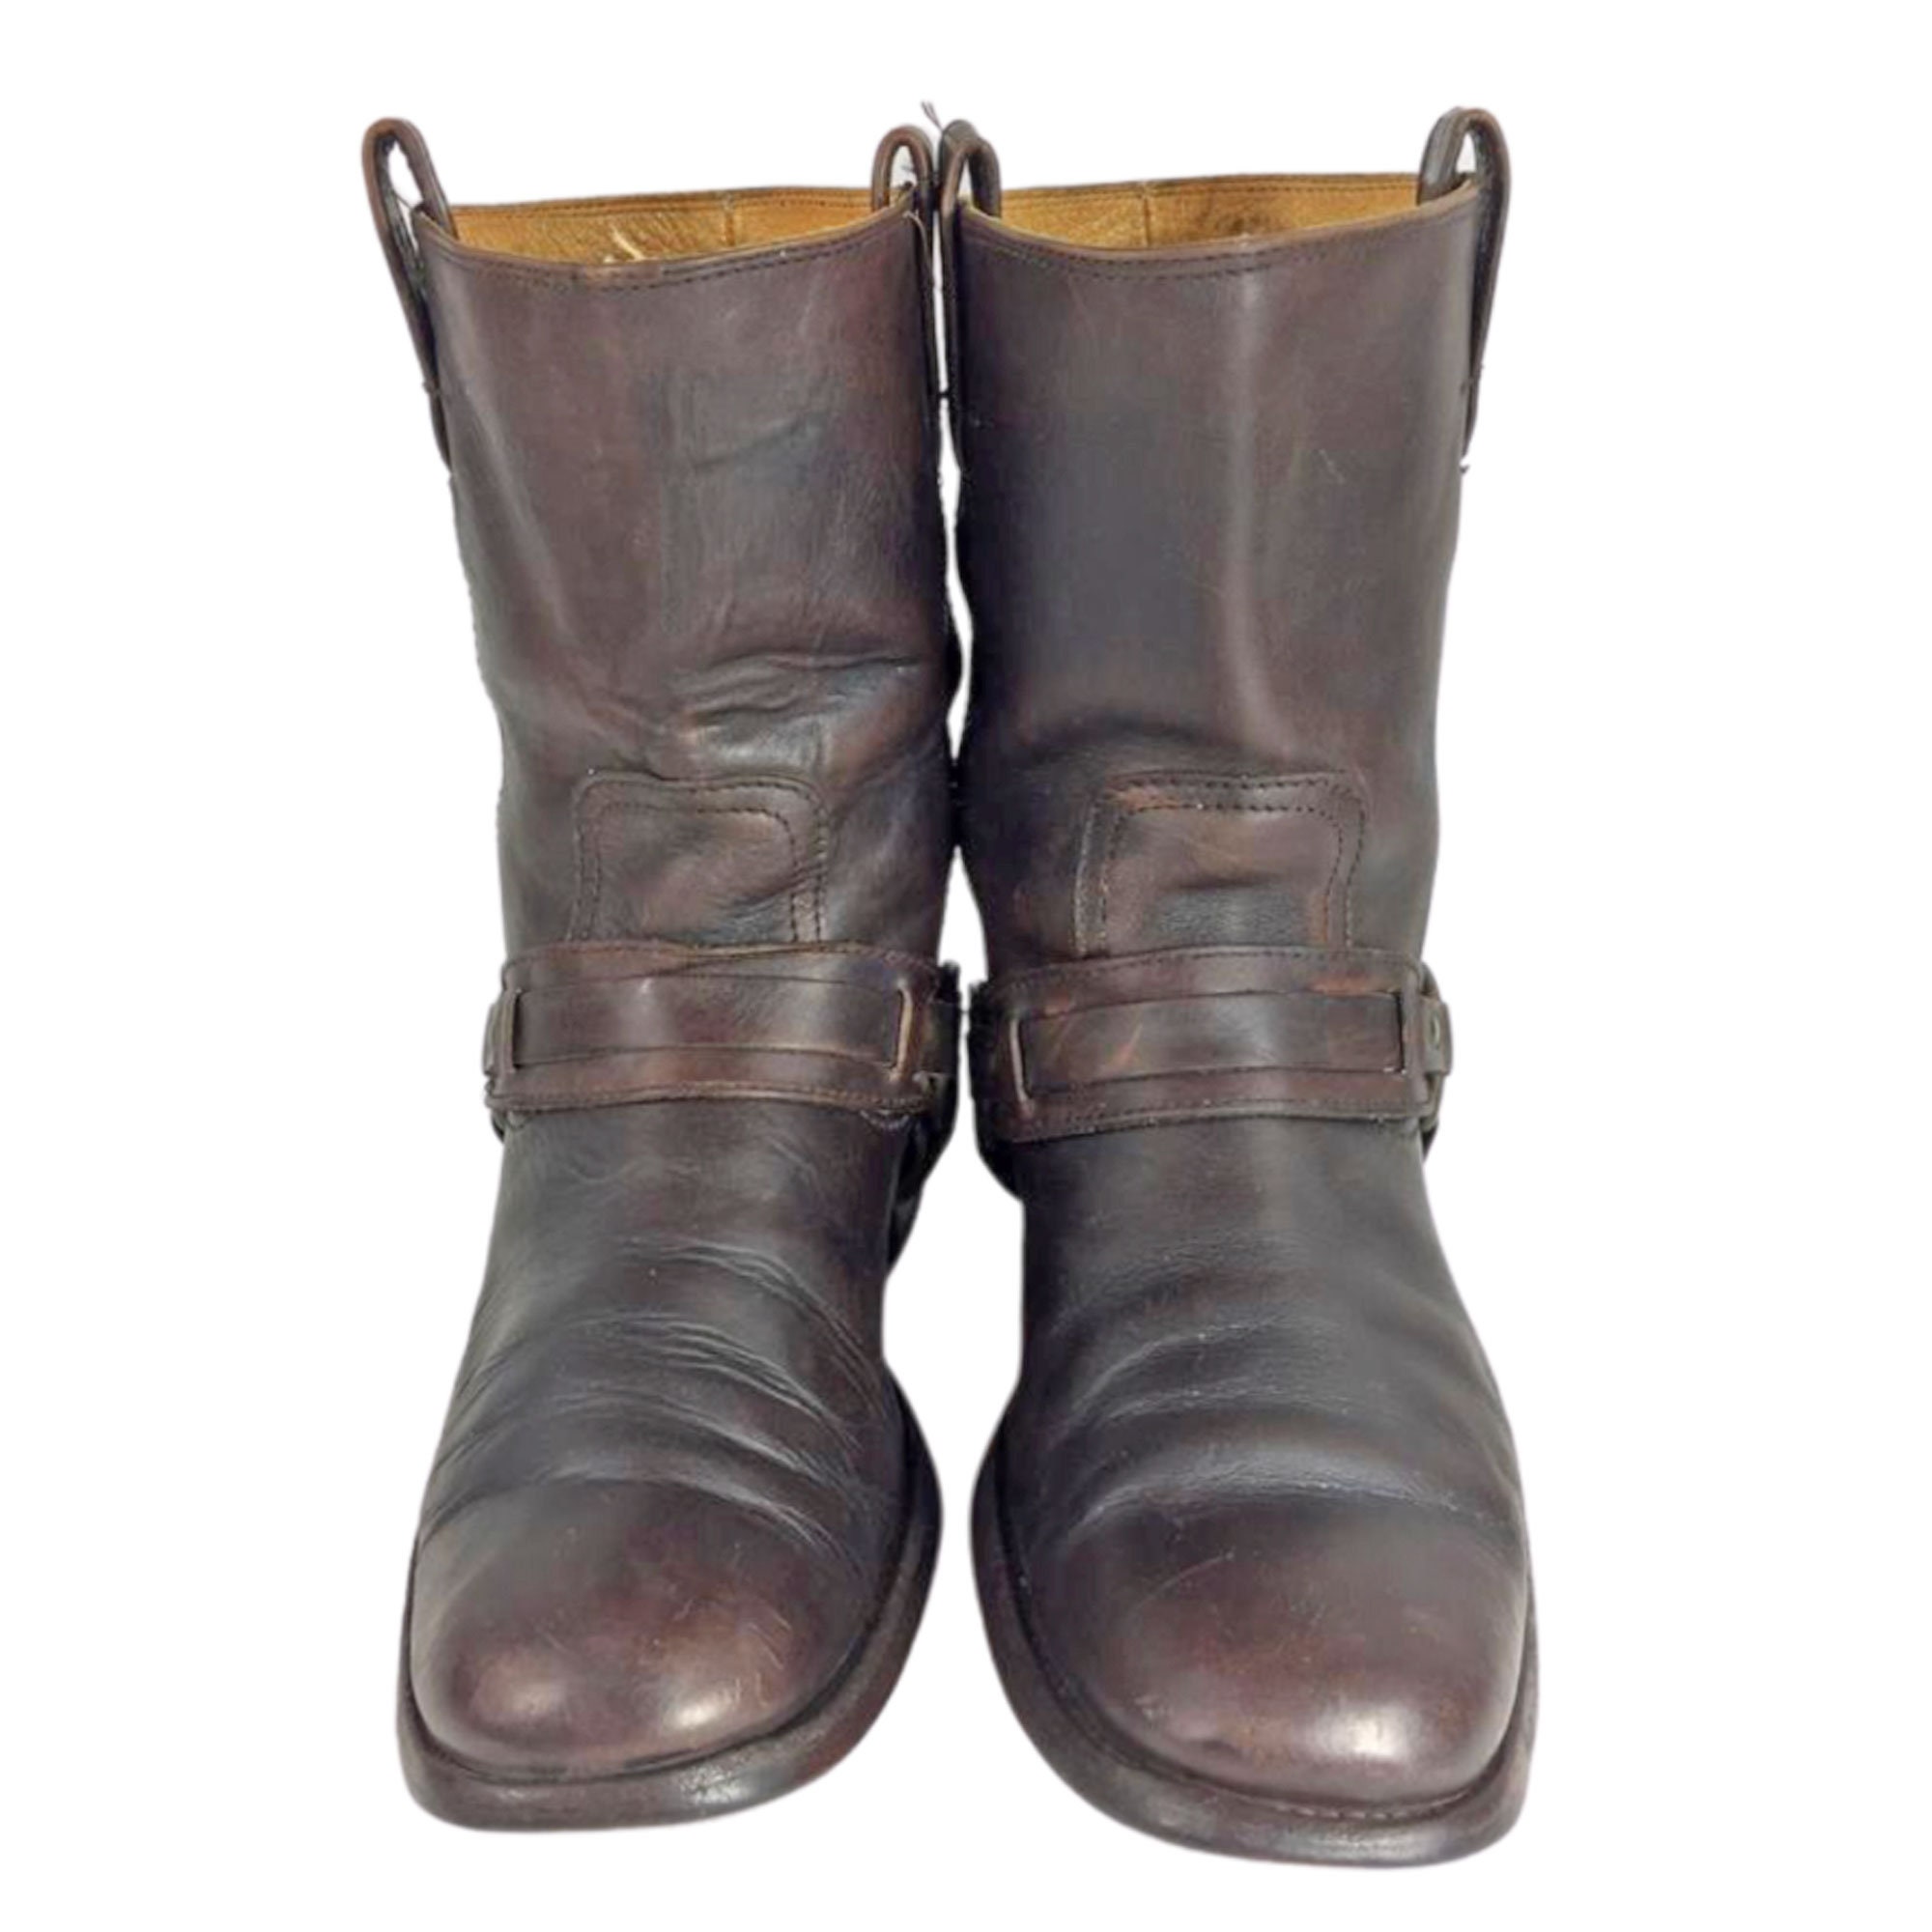 FRYE 87465 JESSE HARNESS Brown Leather Motorcycle Boots Men's Size 8.5 ...